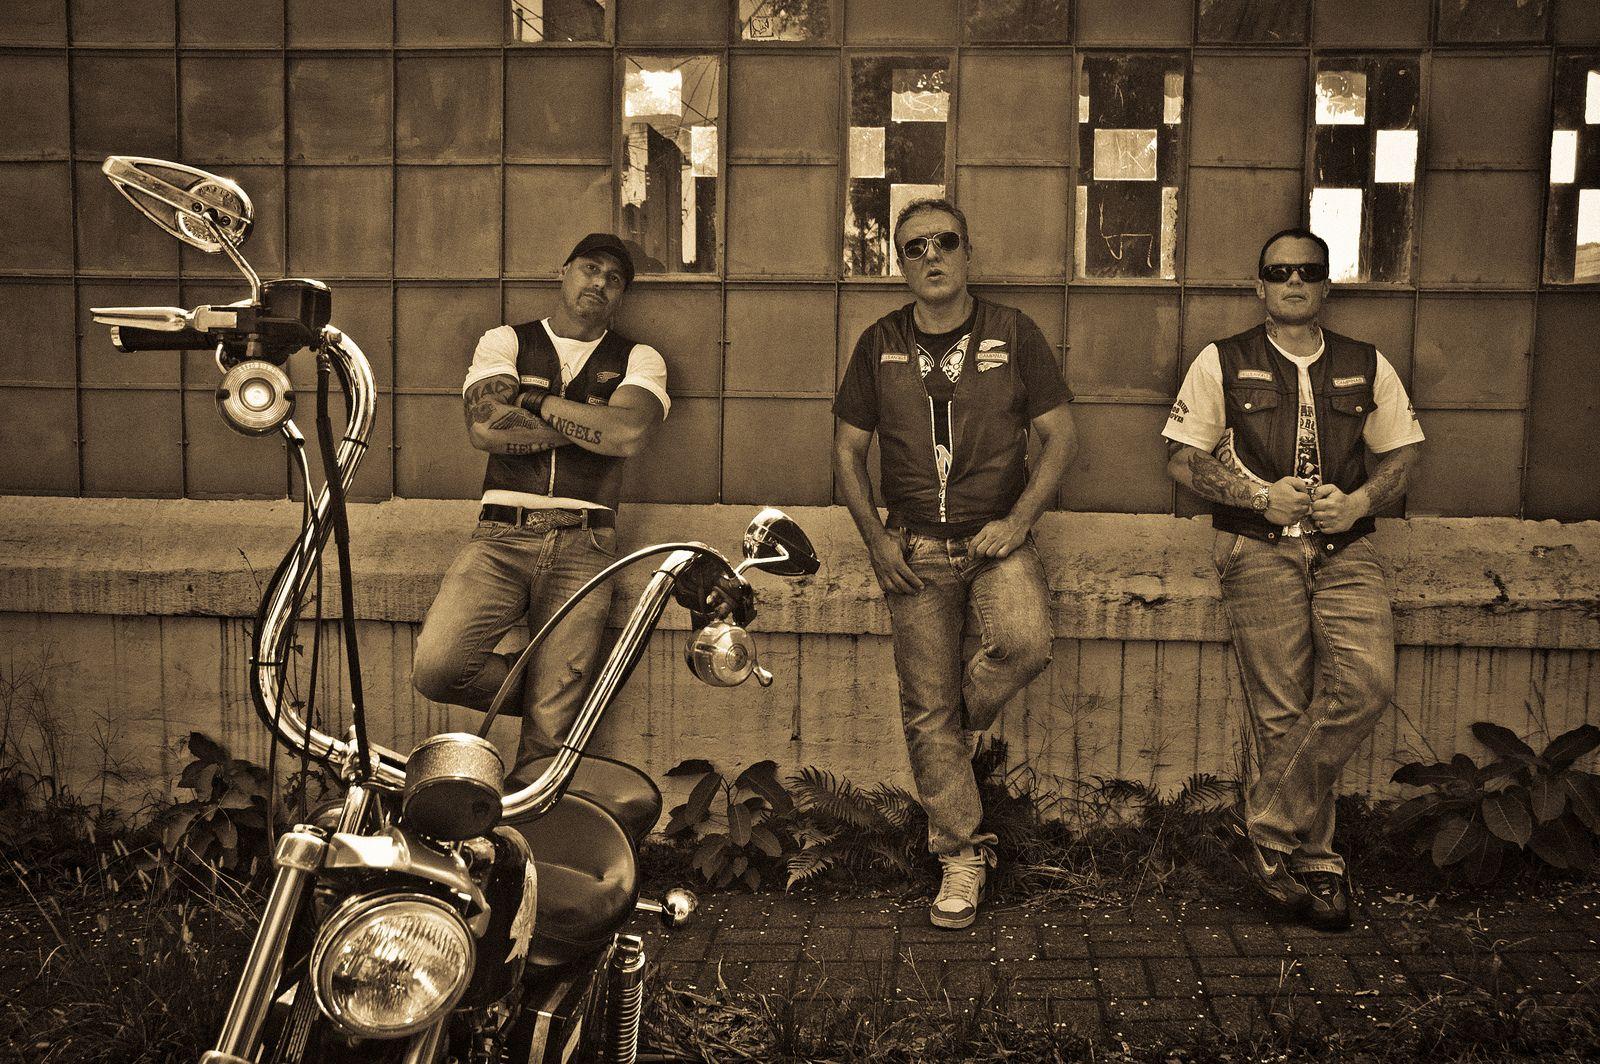 Hells Angels Brazil Wallpaper and Background Imagex1064